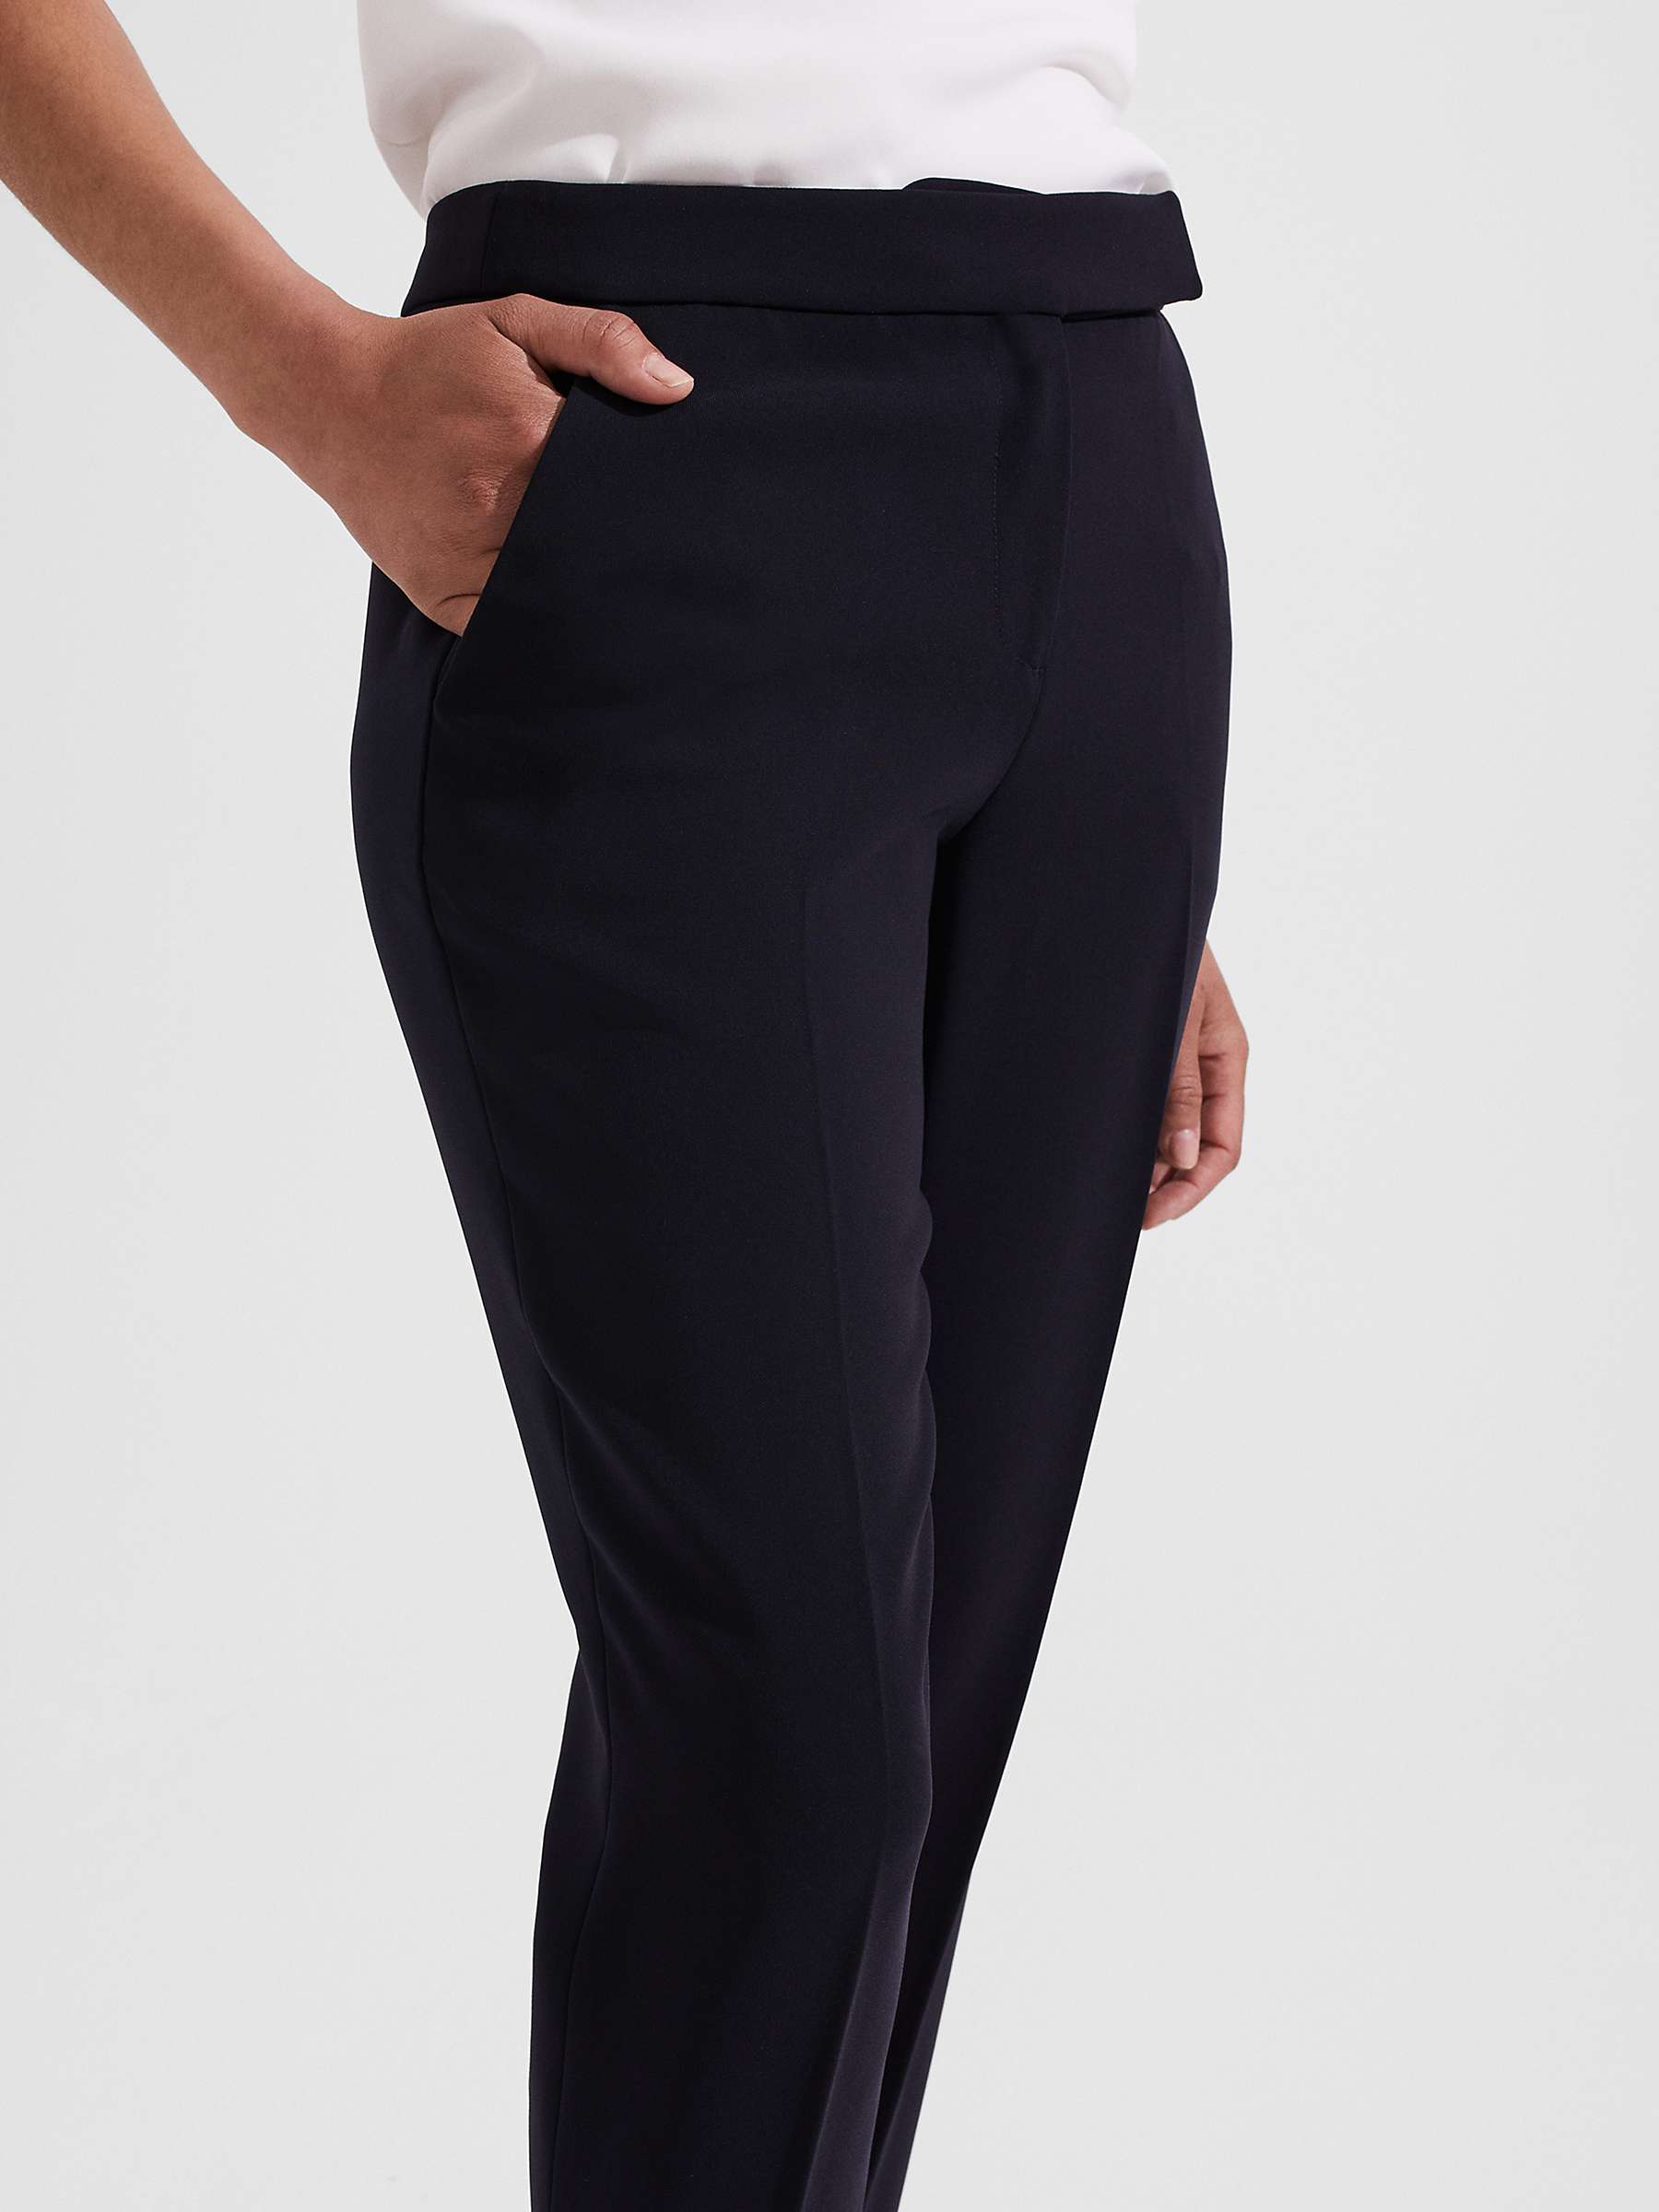 Buy Hobbs Stevie Plain Tailored Tapered Trousers, Navy Online at johnlewis.com